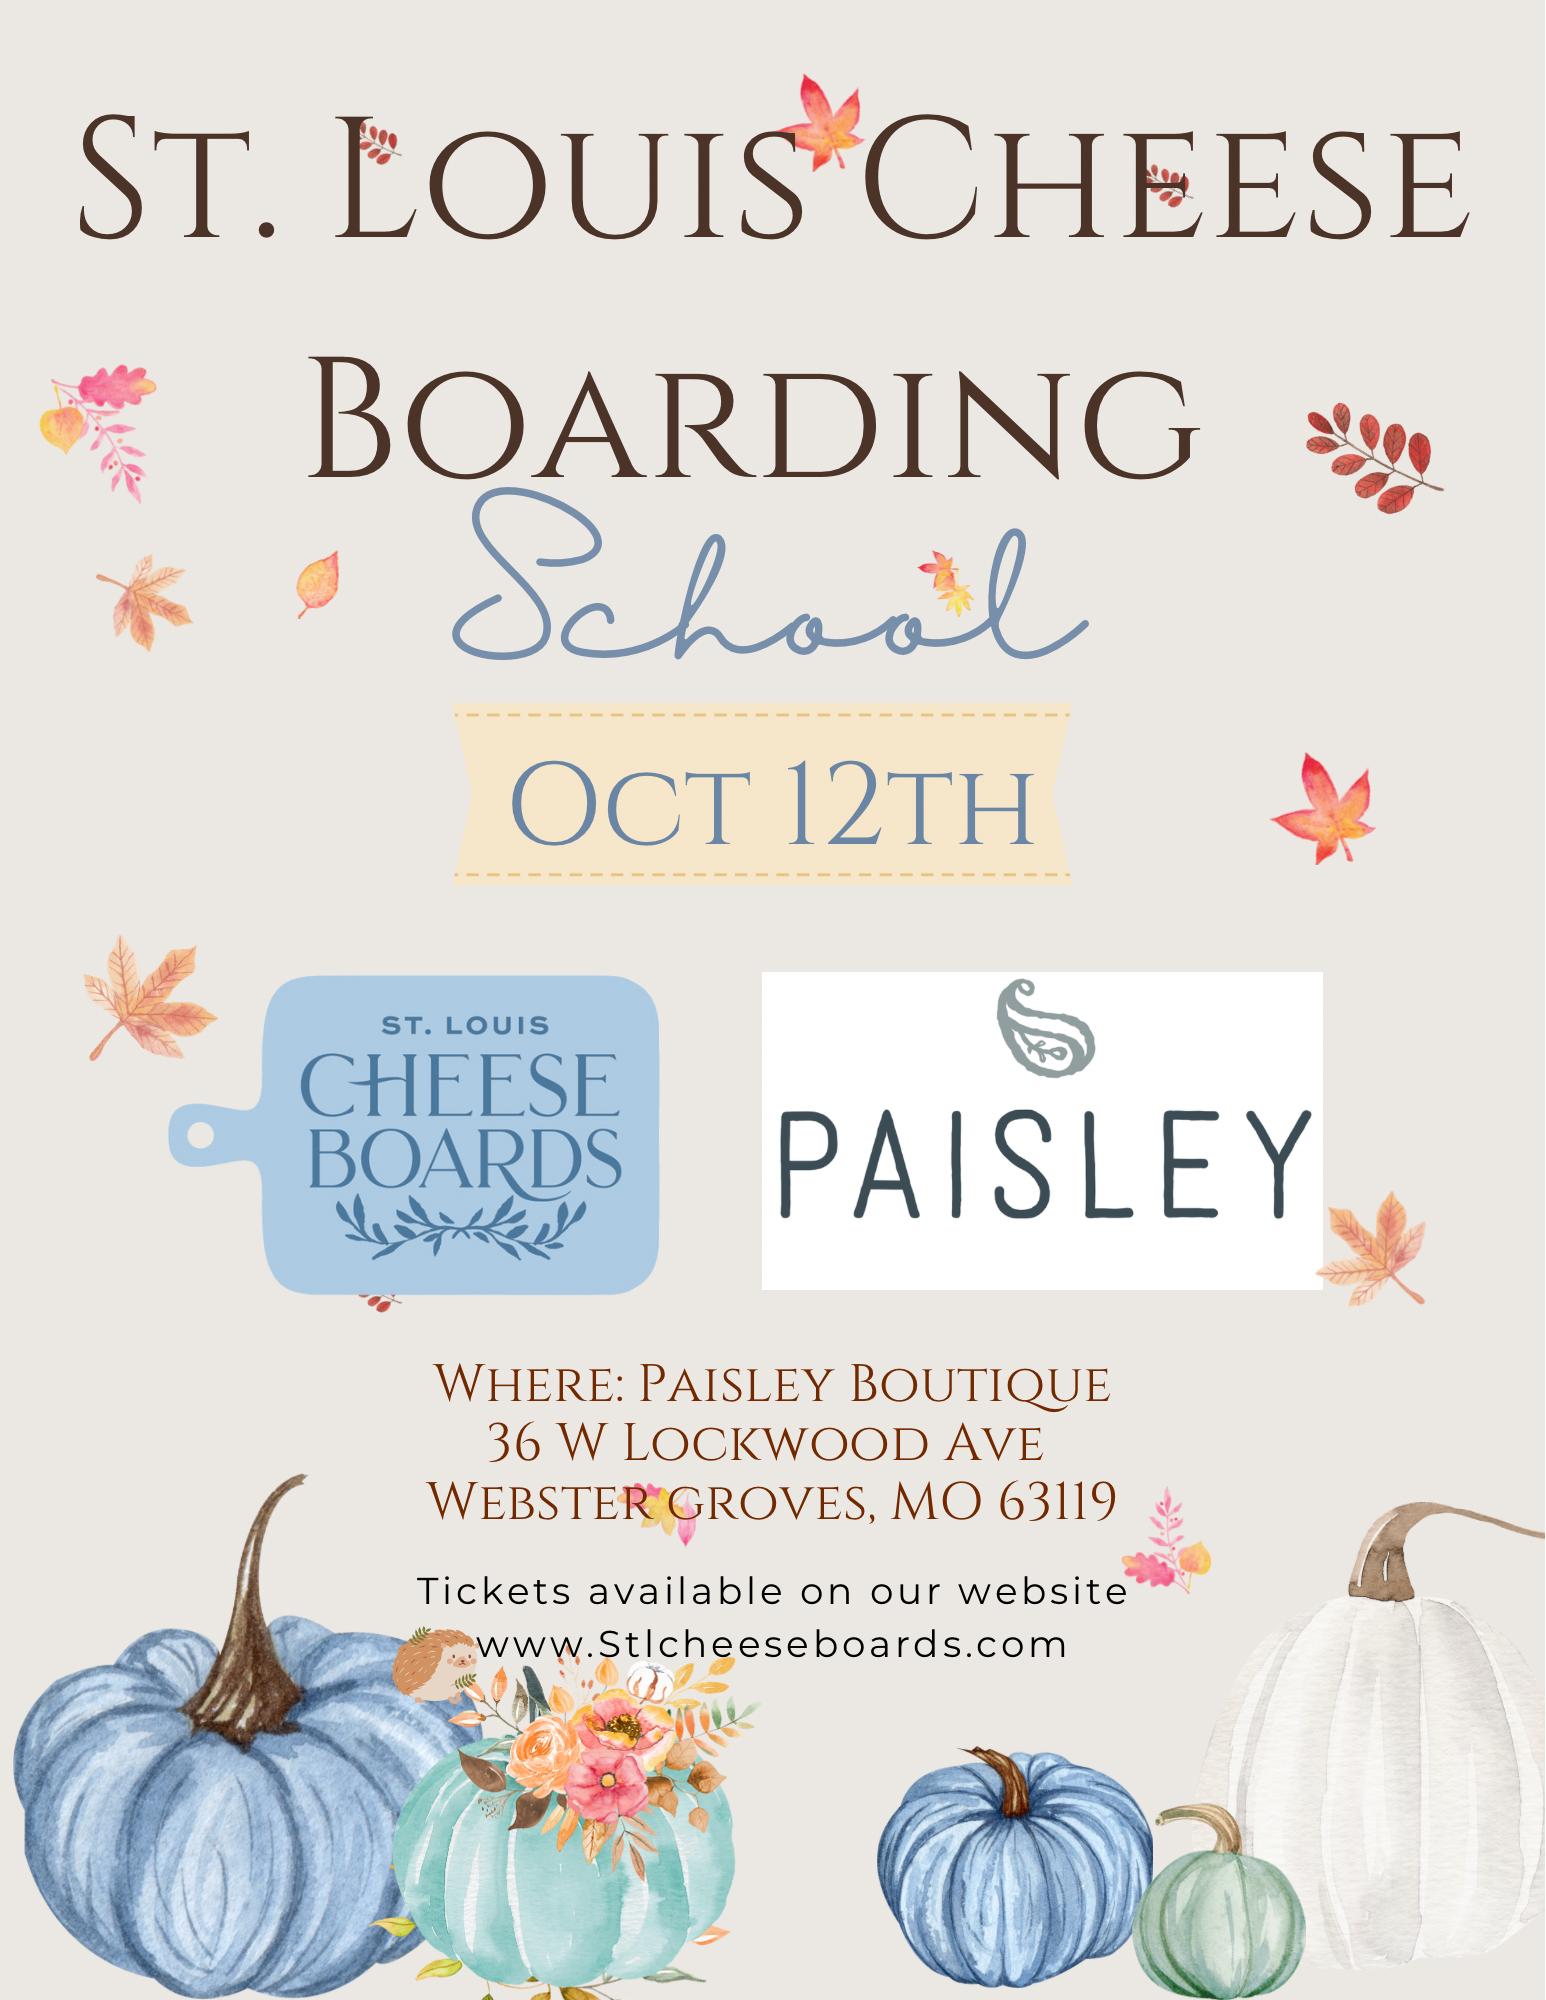 STL Cheese Boarding School @ Paisley Boutique: Oct 12th 6-8pm